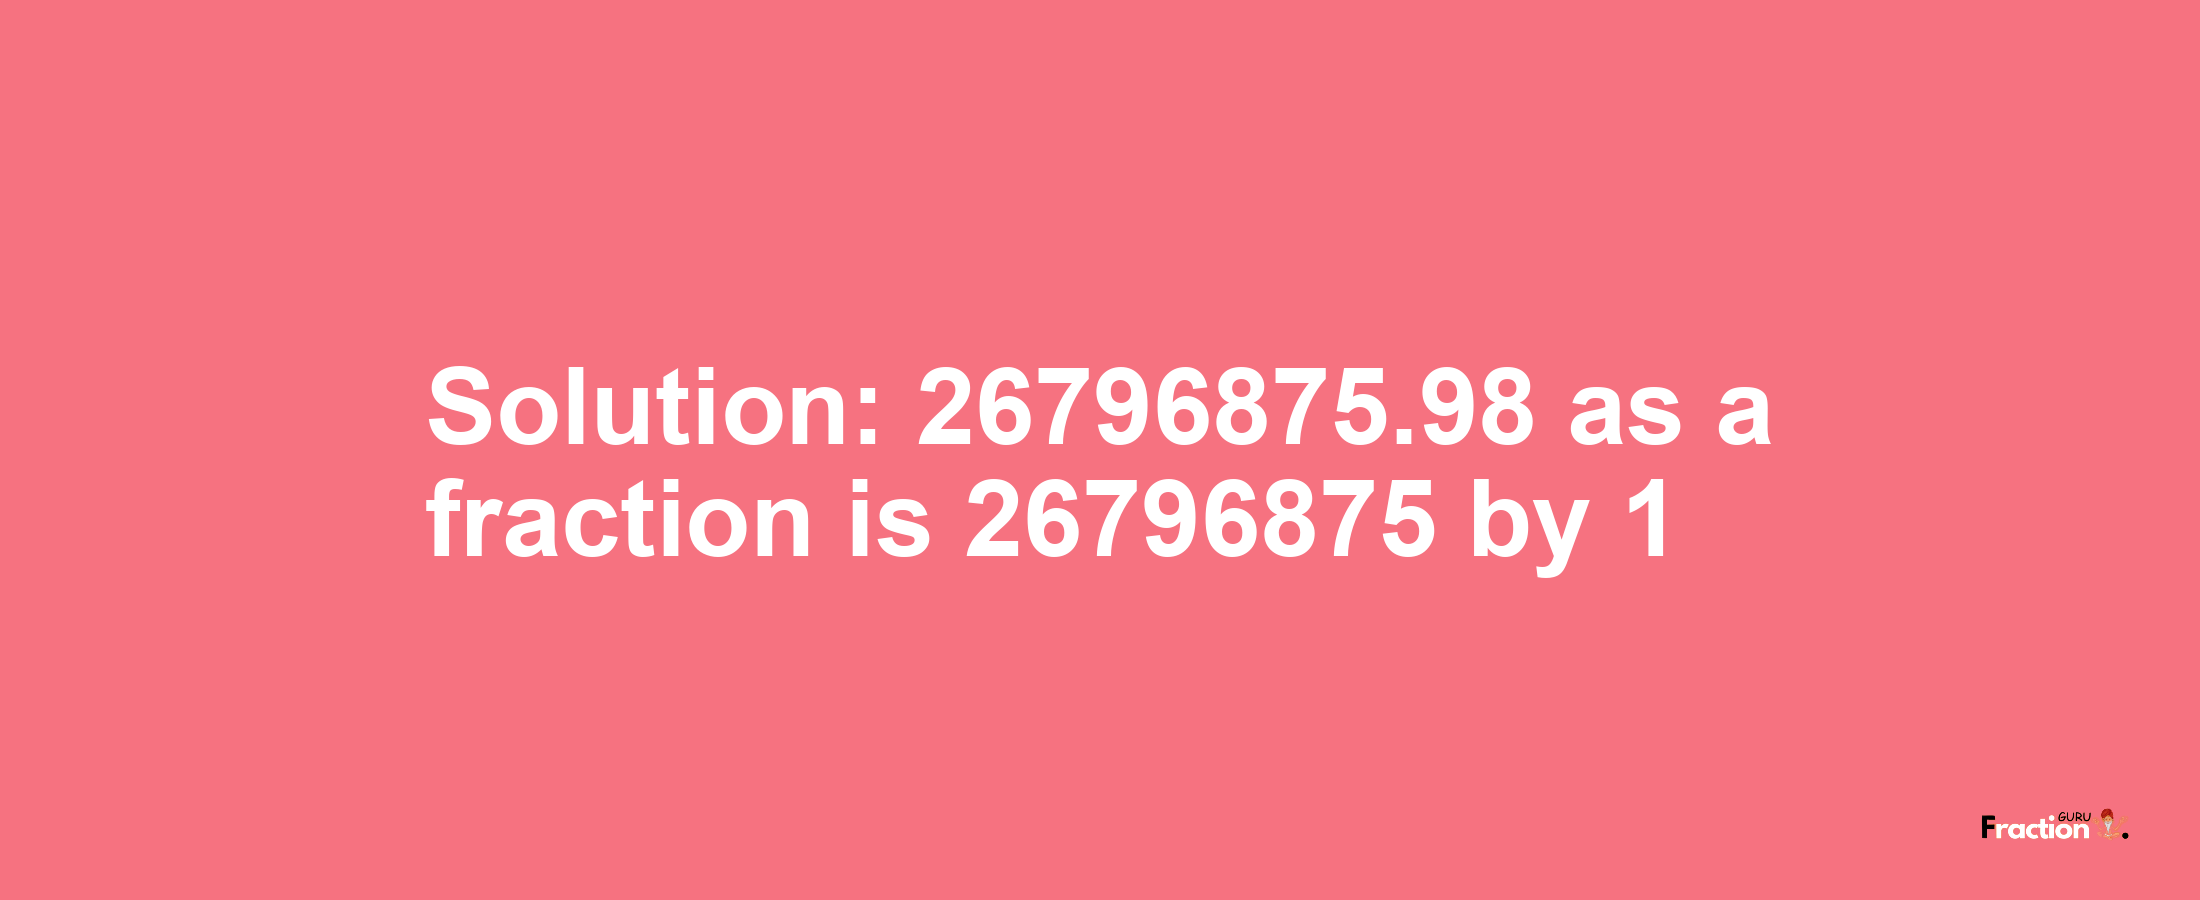 Solution:26796875.98 as a fraction is 26796875/1